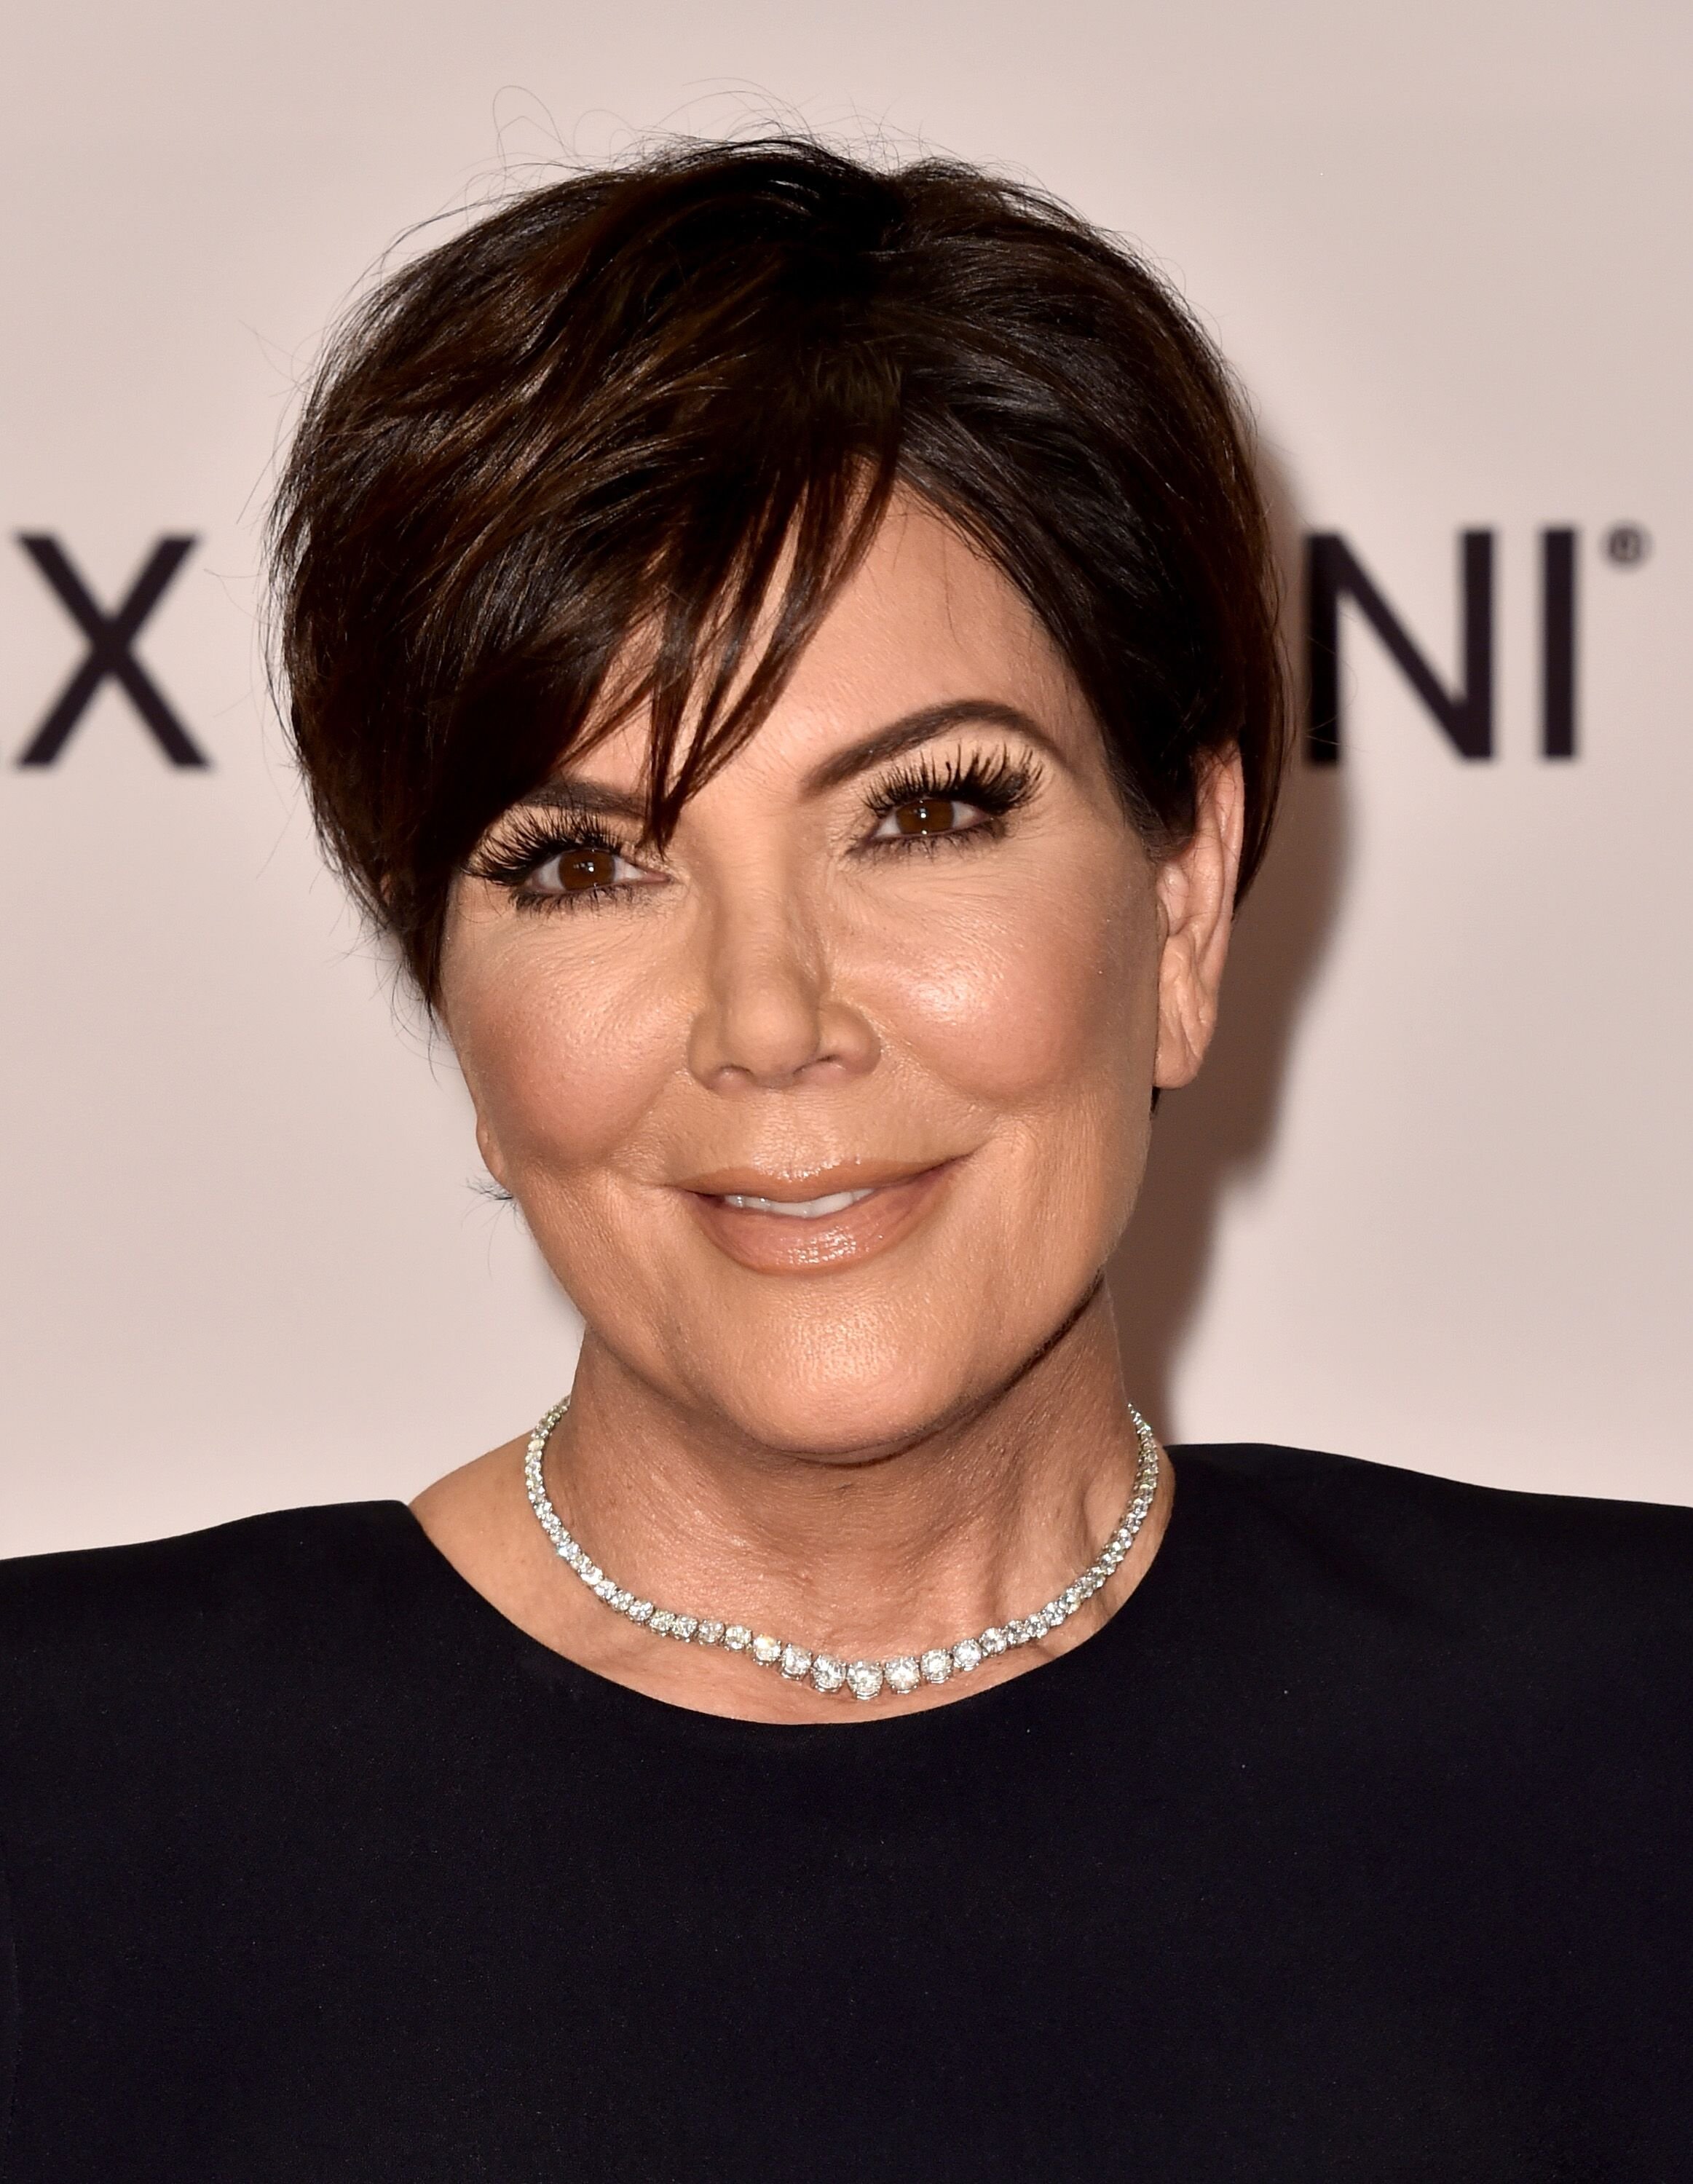 Kris Jenner attends the 24th Annual Race To Erase MS Gala at The Beverly Hilton Hotel on May 5, 2017. | Photo: Getty Images